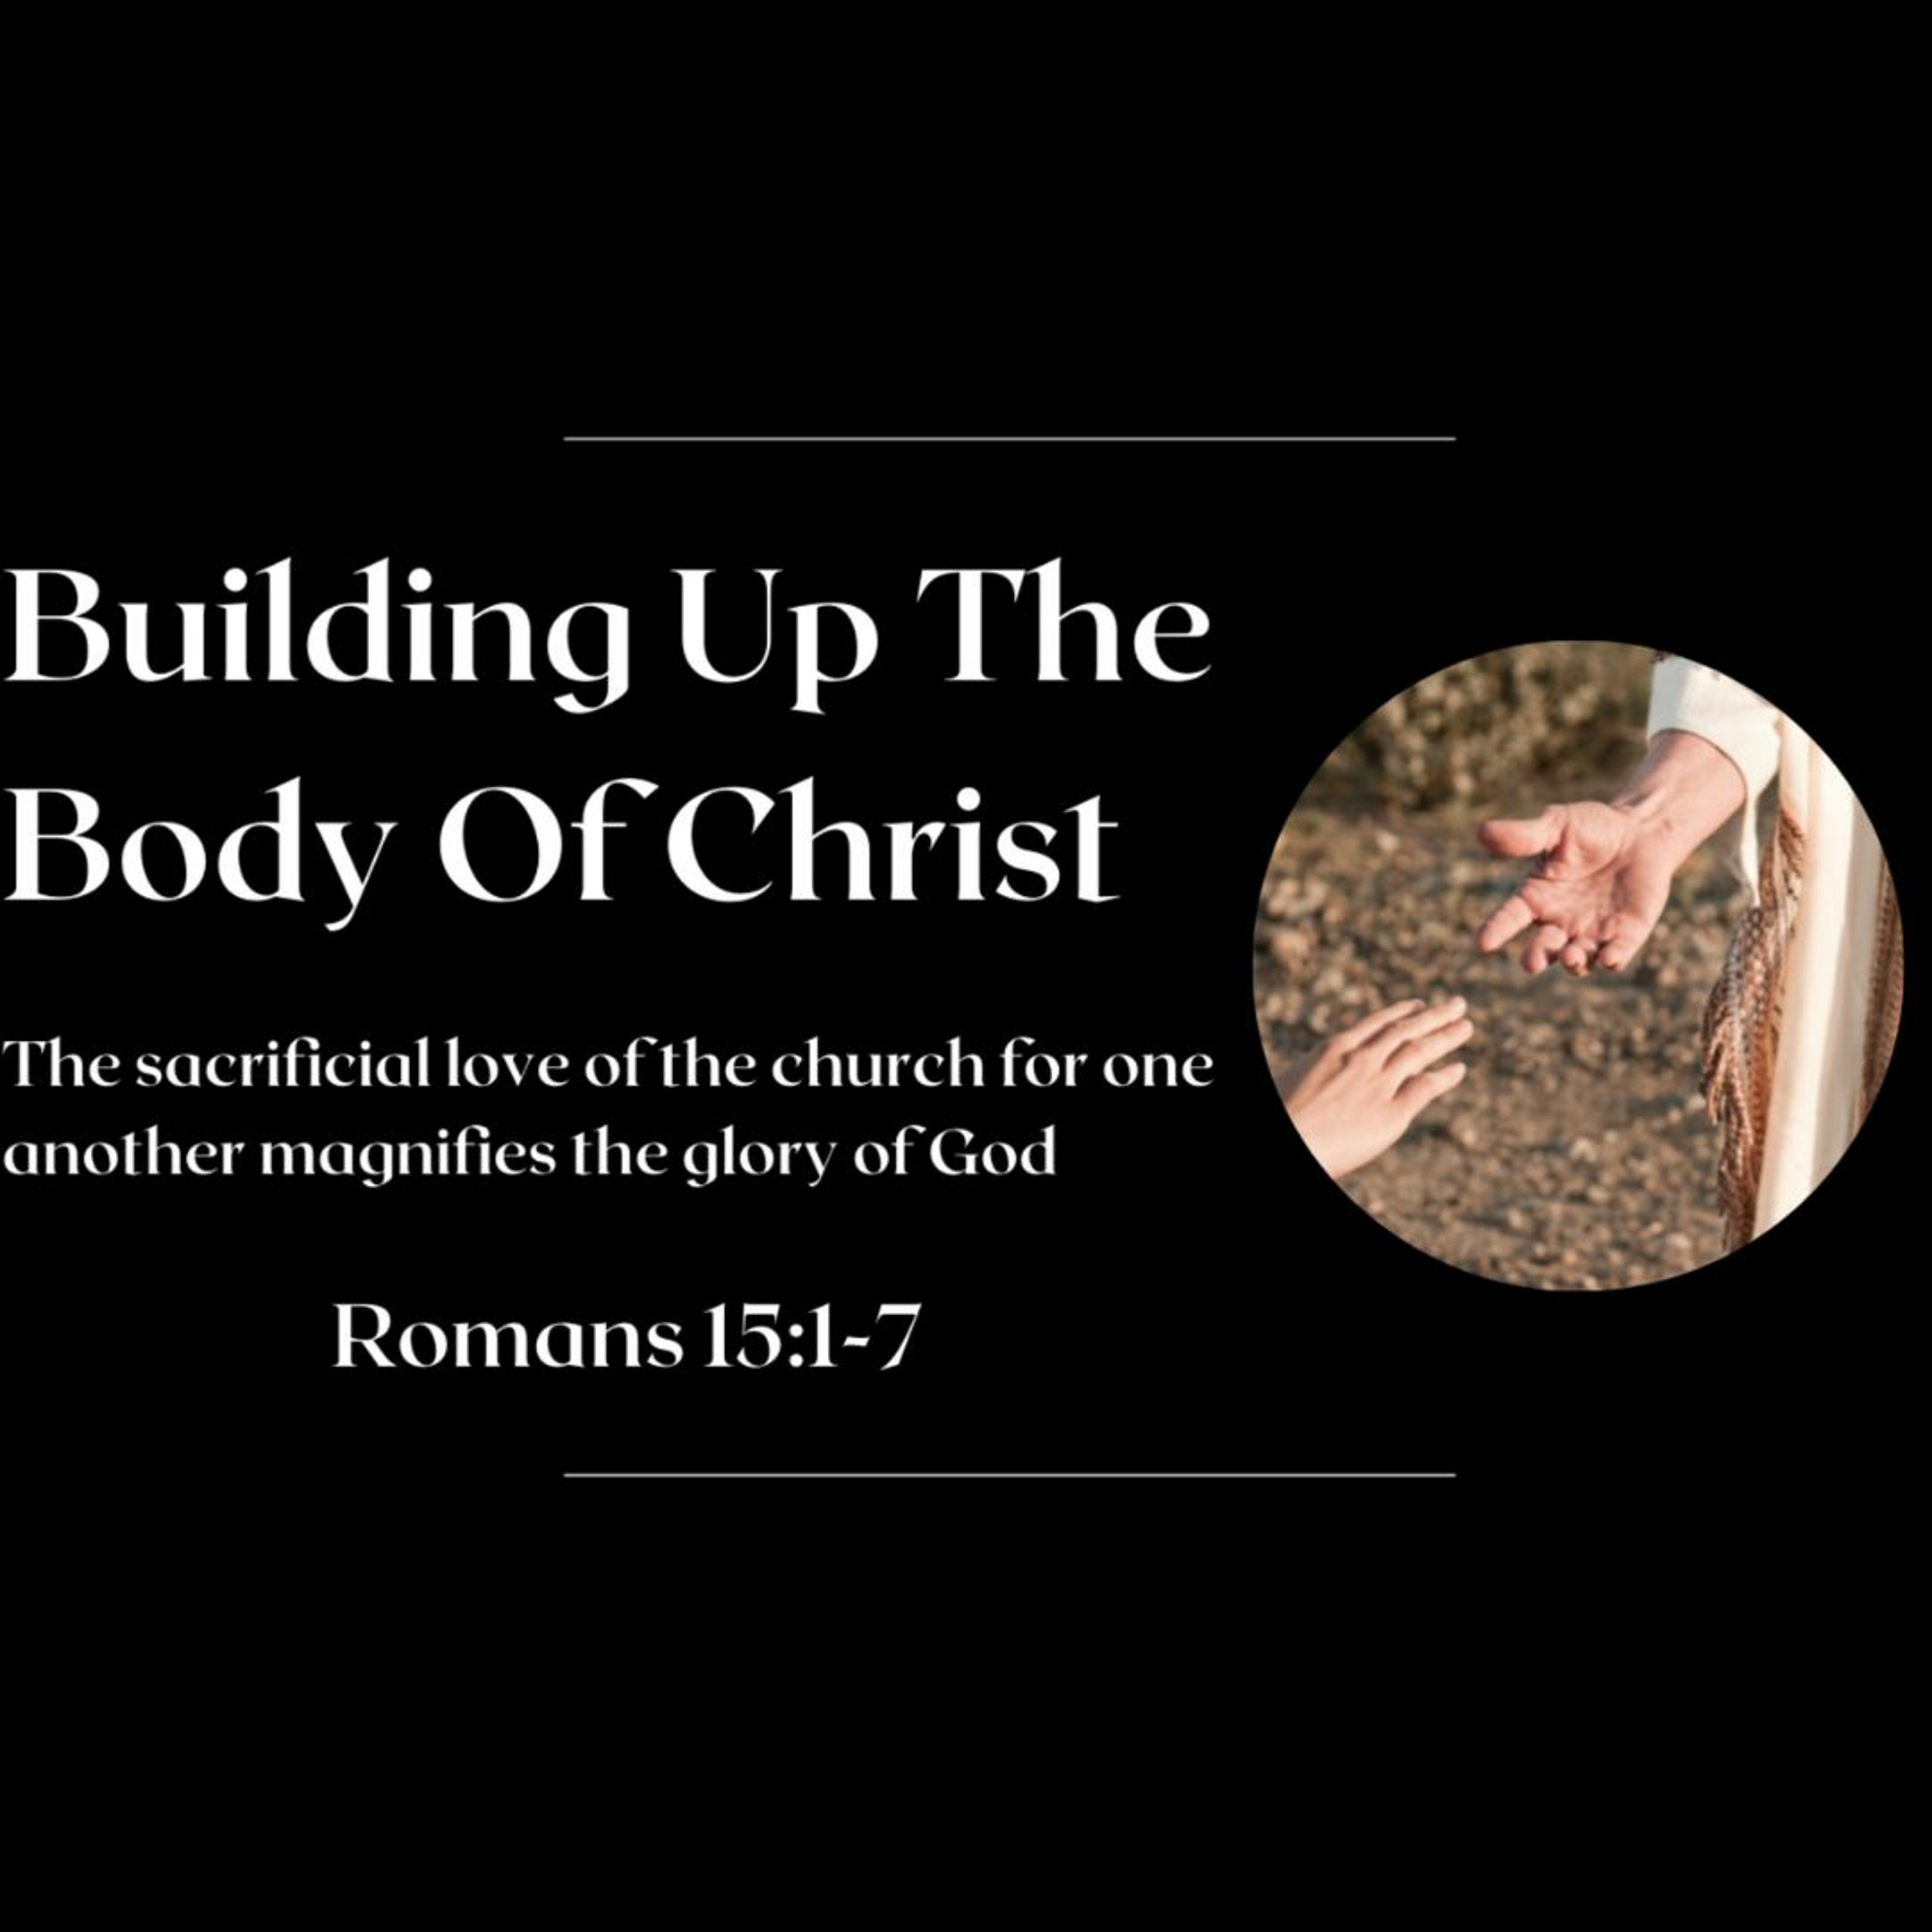 Building Up the Body of Christ (Romans 15:1-7)